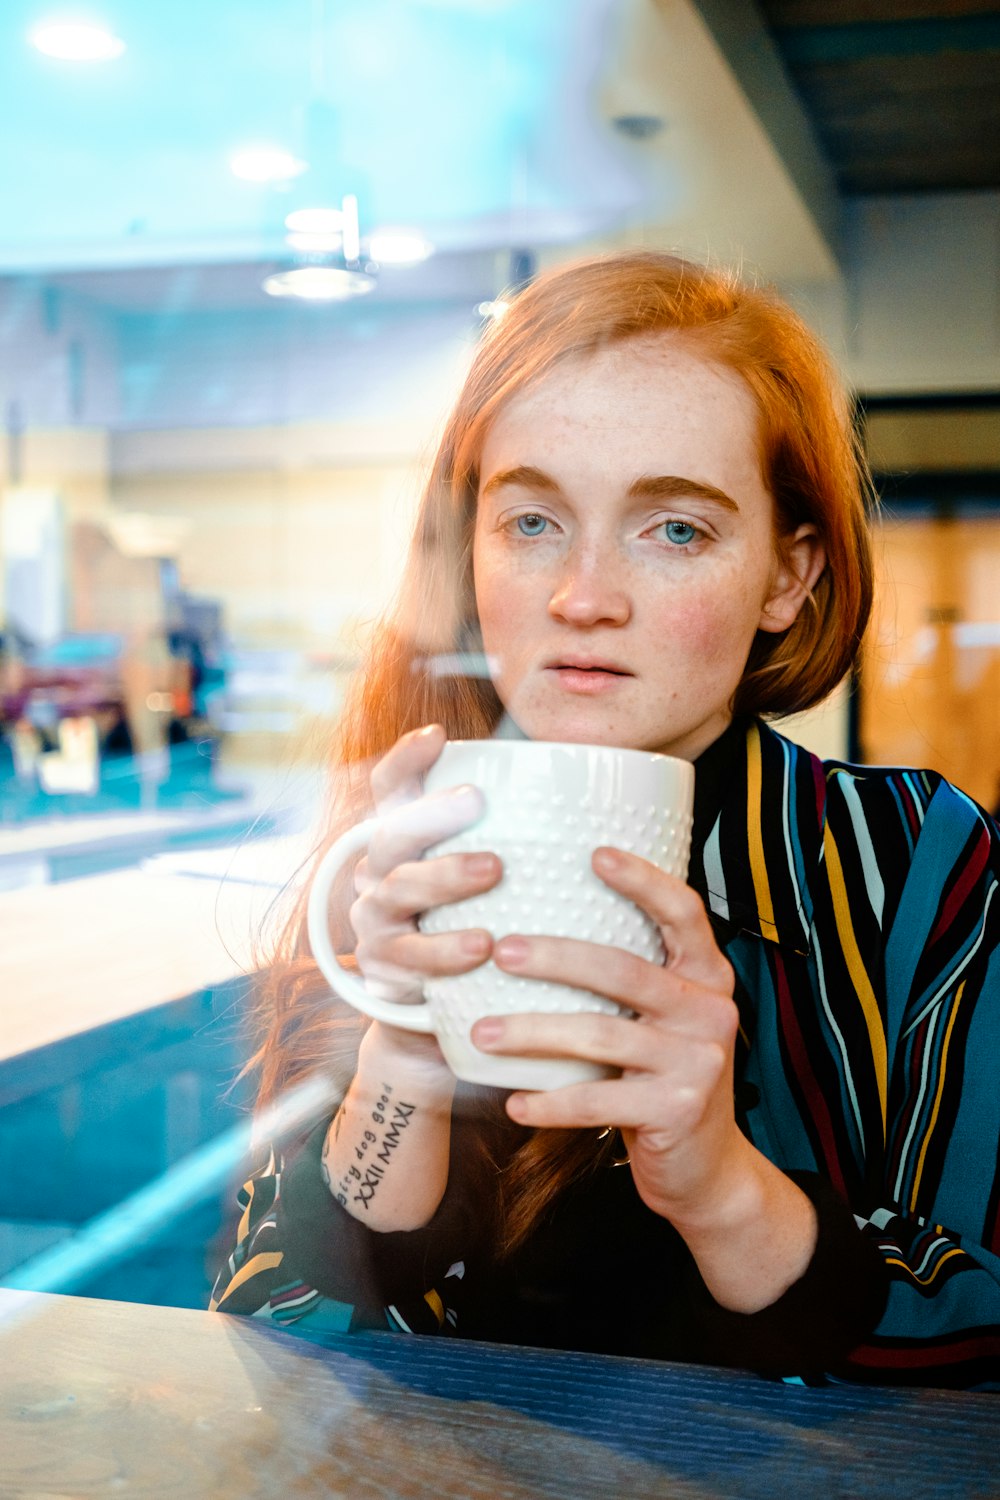 woman in blue and white striped shirt drinking from white ceramic mug